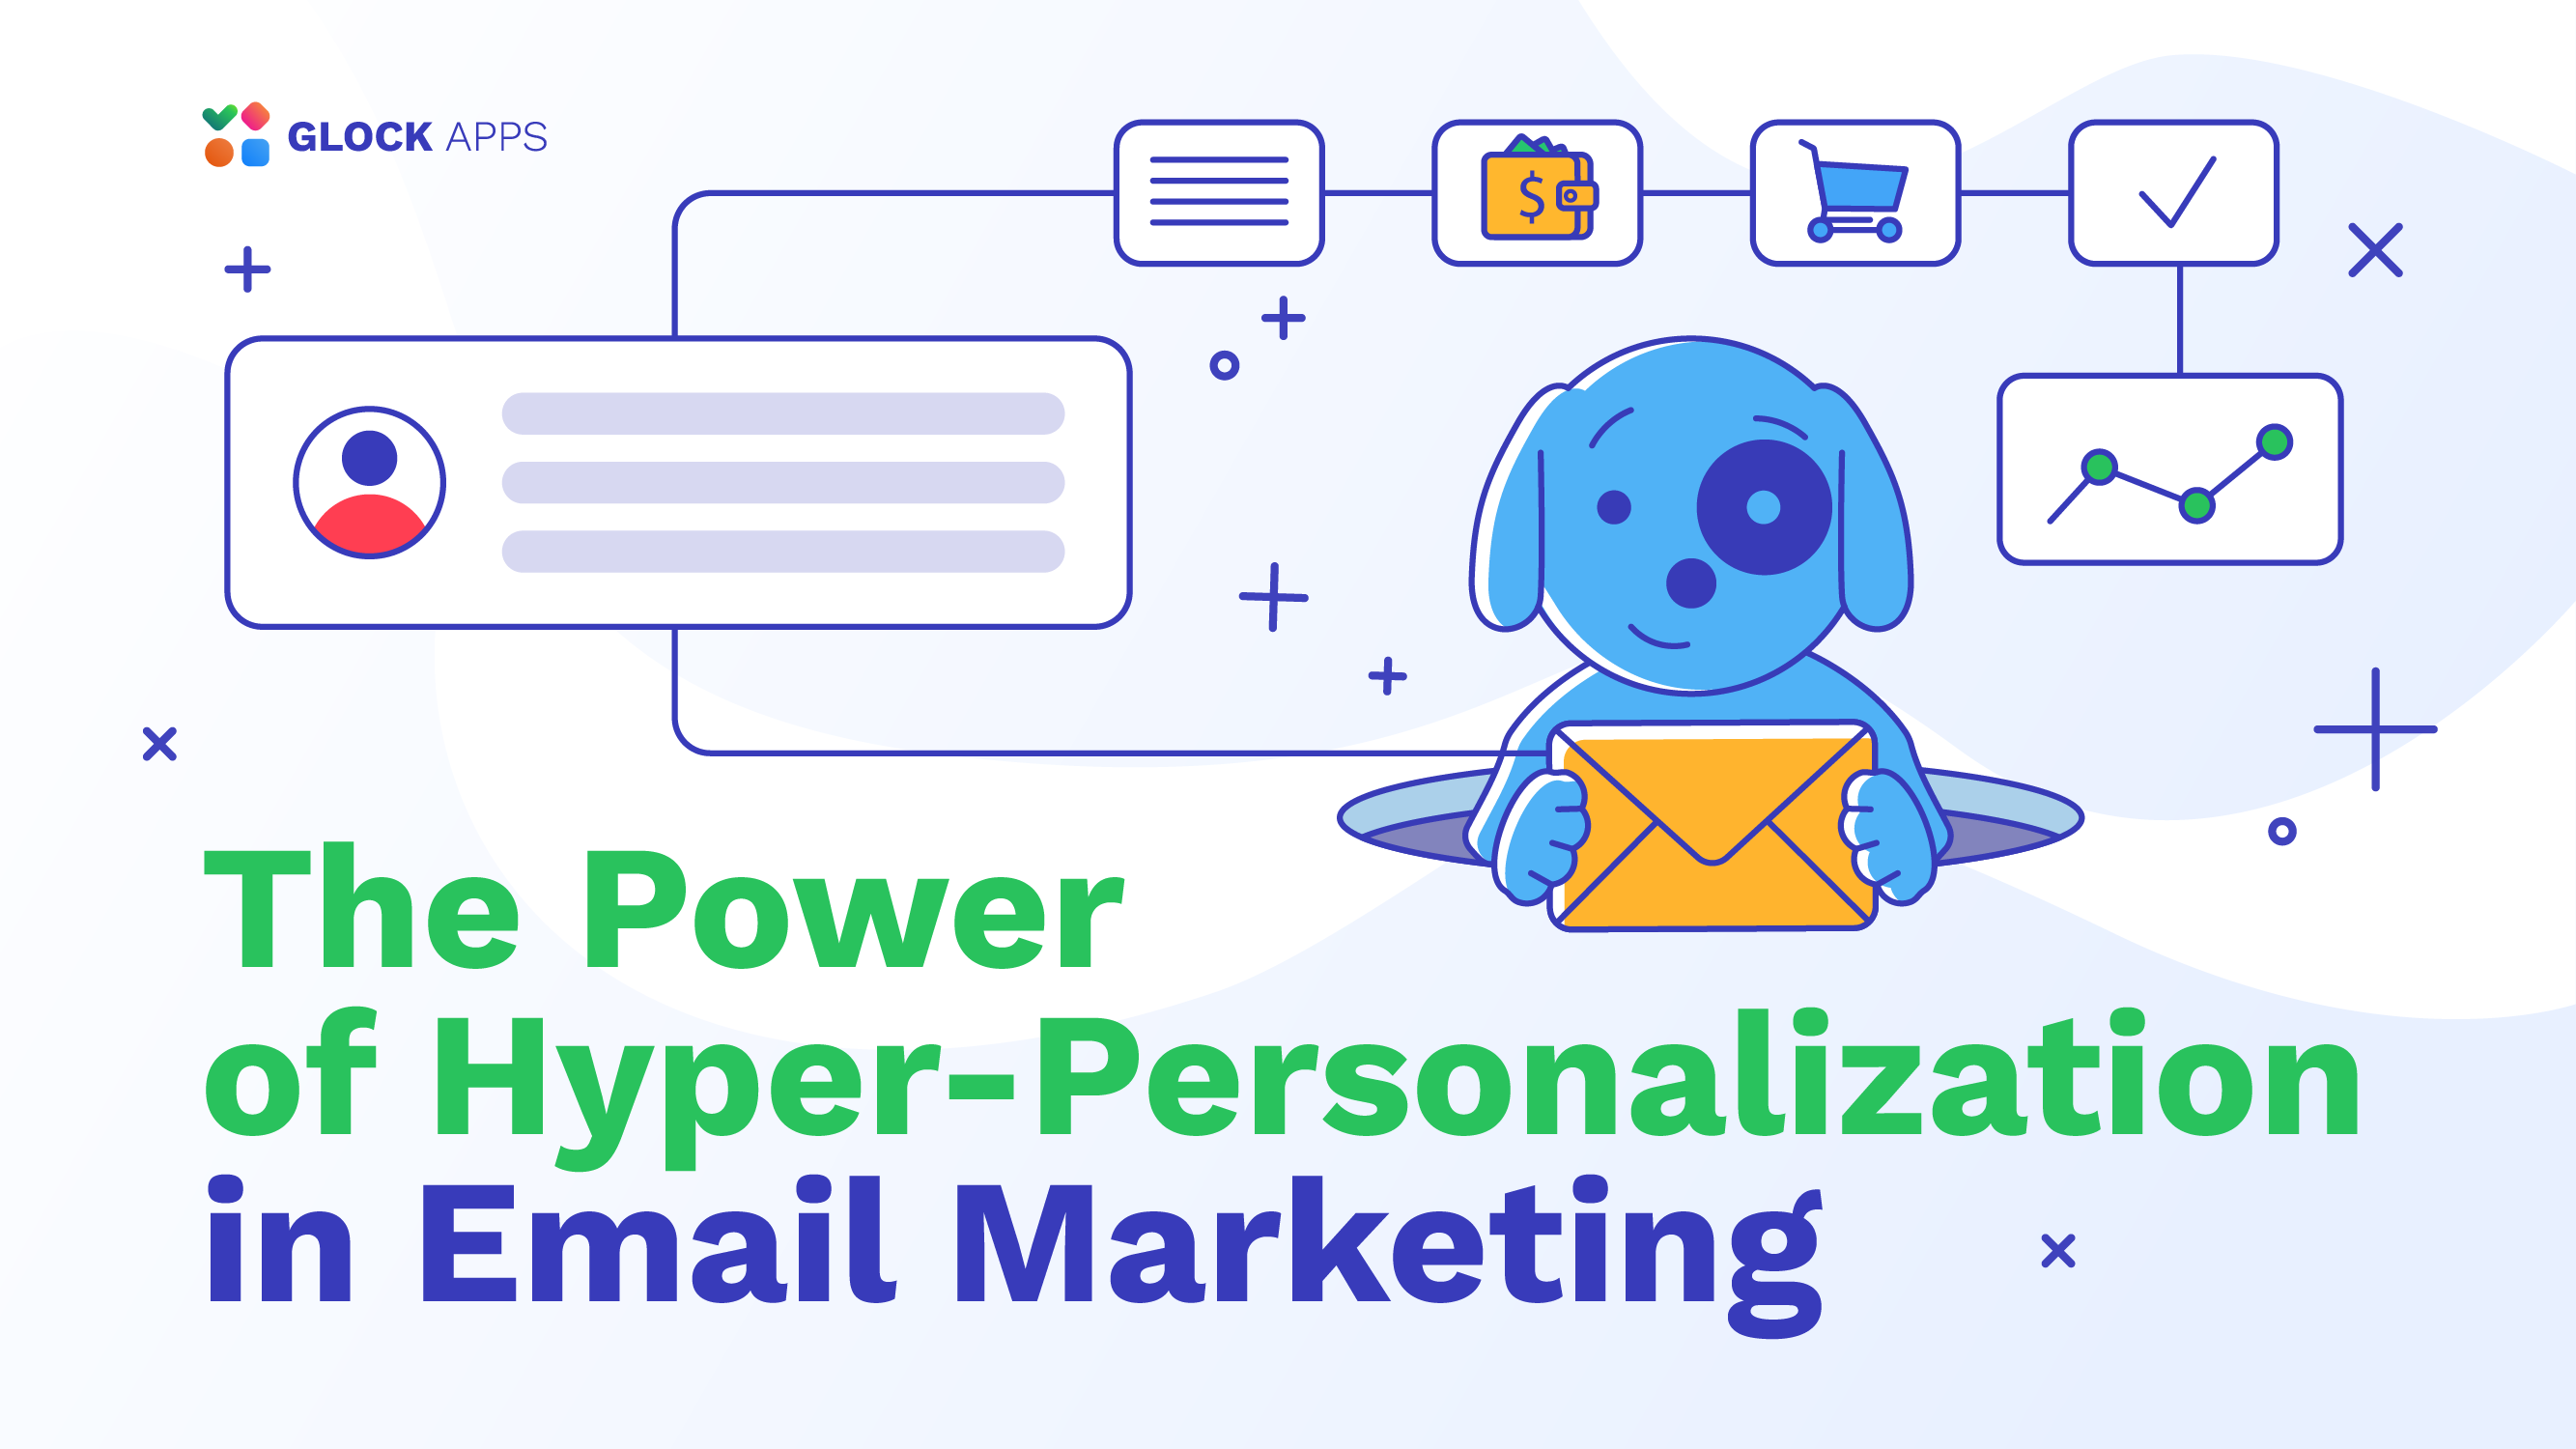 Email Marketing Hyper-Personalization